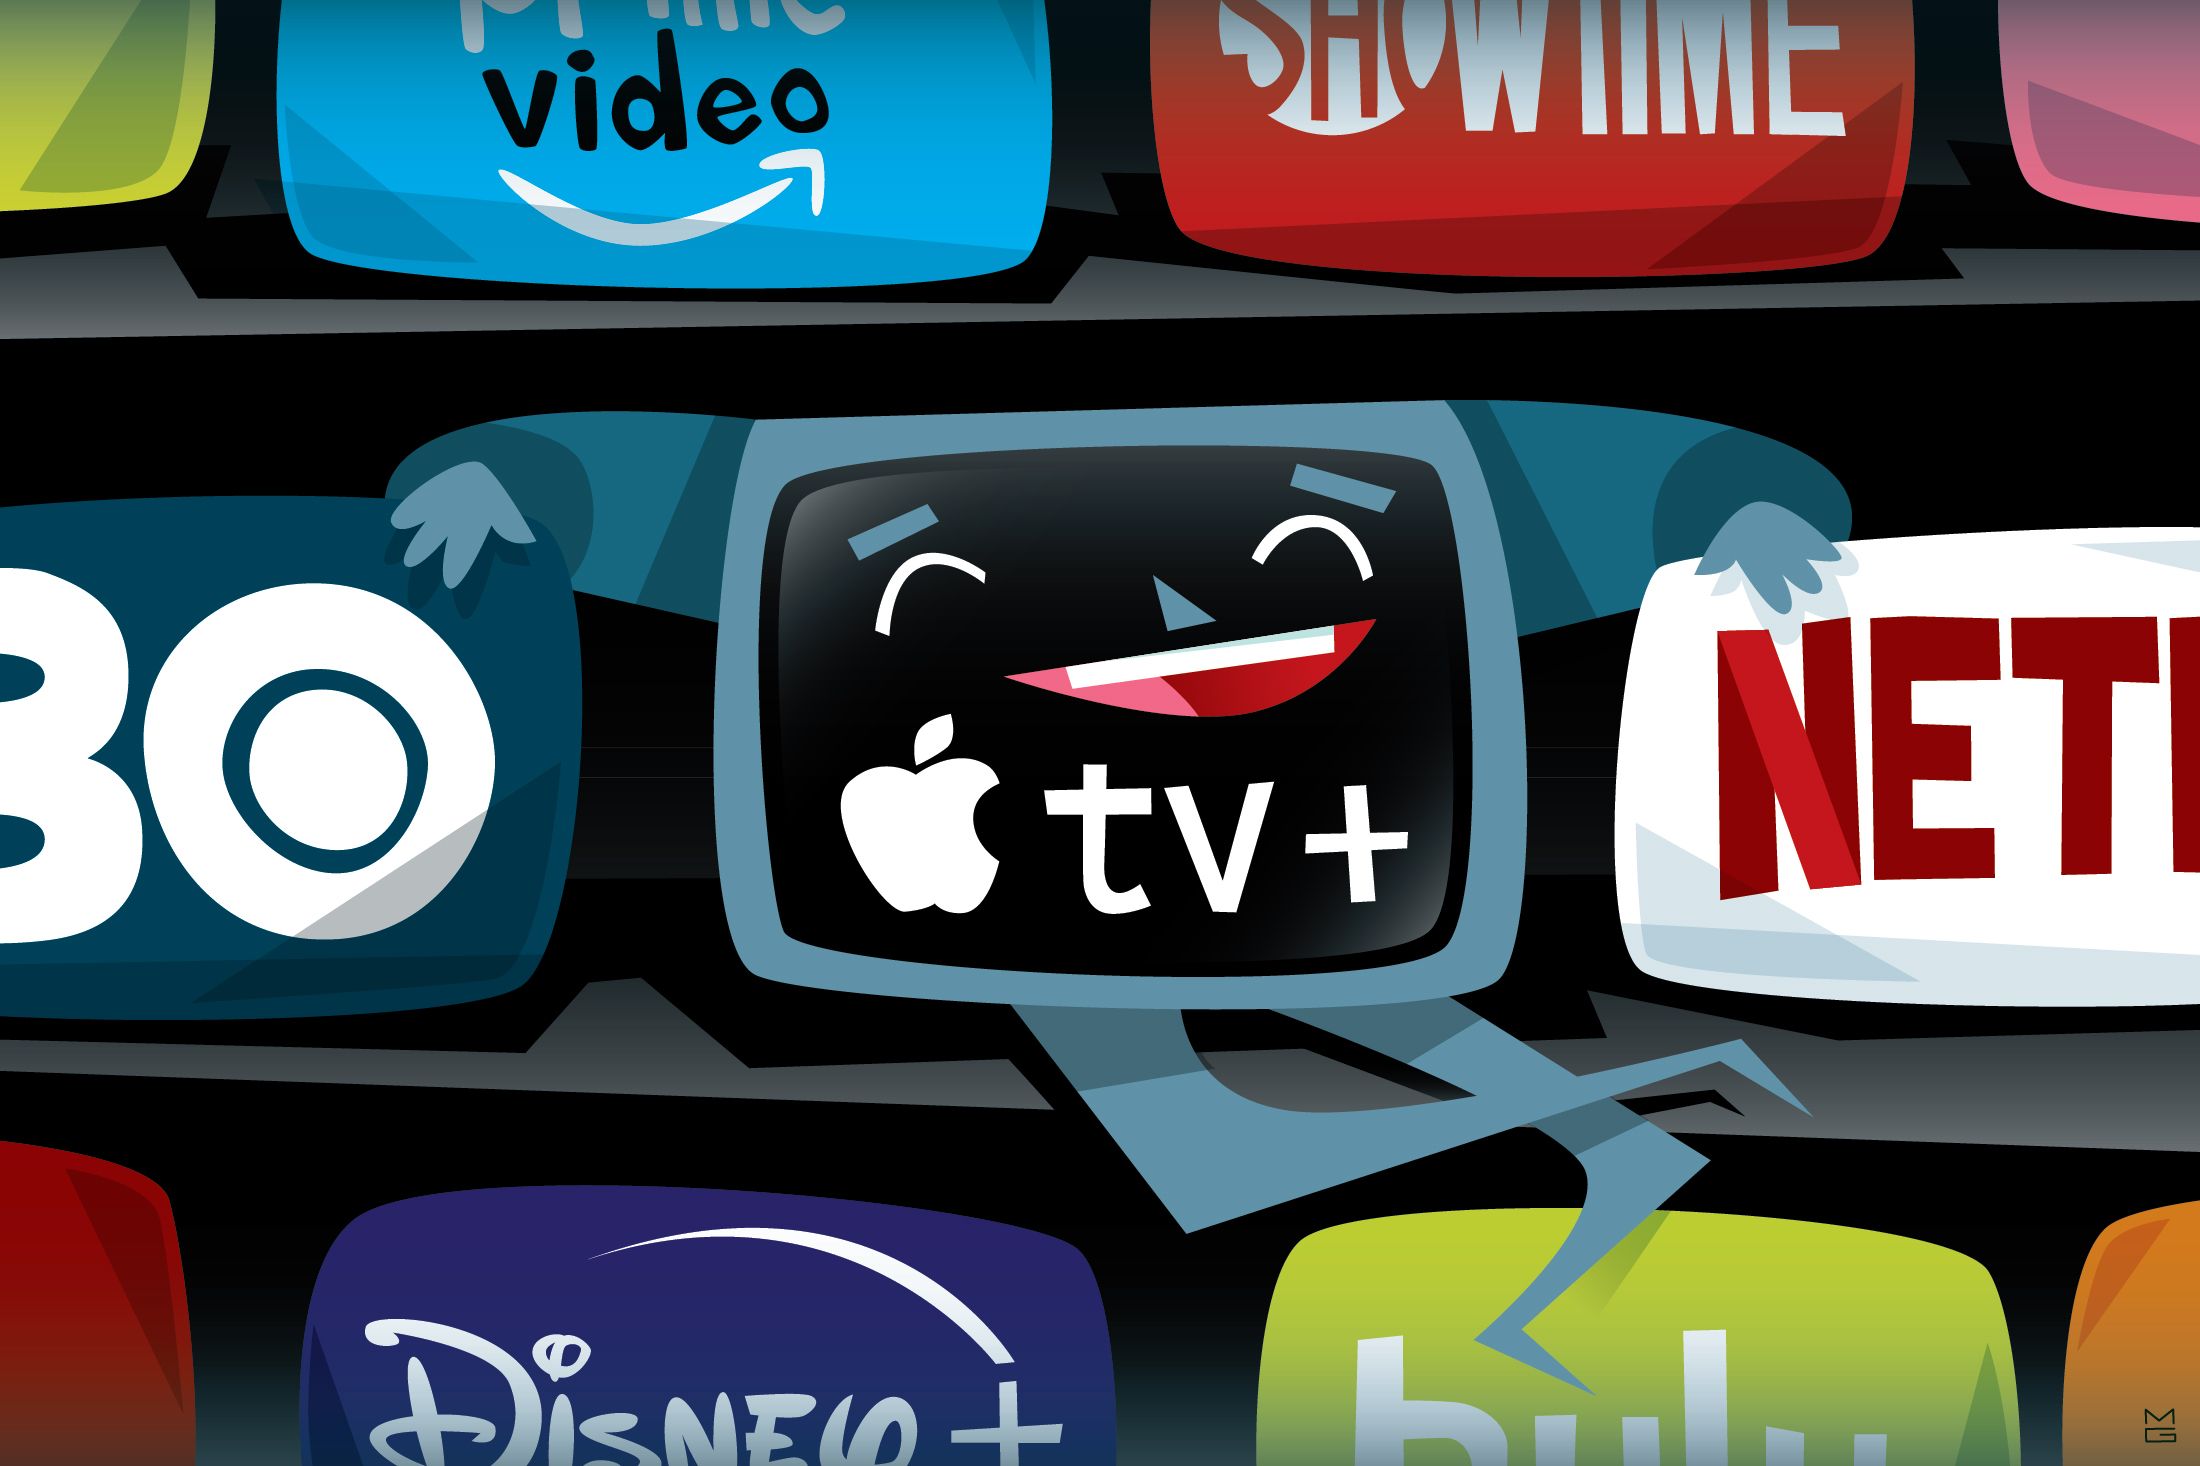 Apple to introduce Spray on TV at Trussville Consumer Electronics Expo